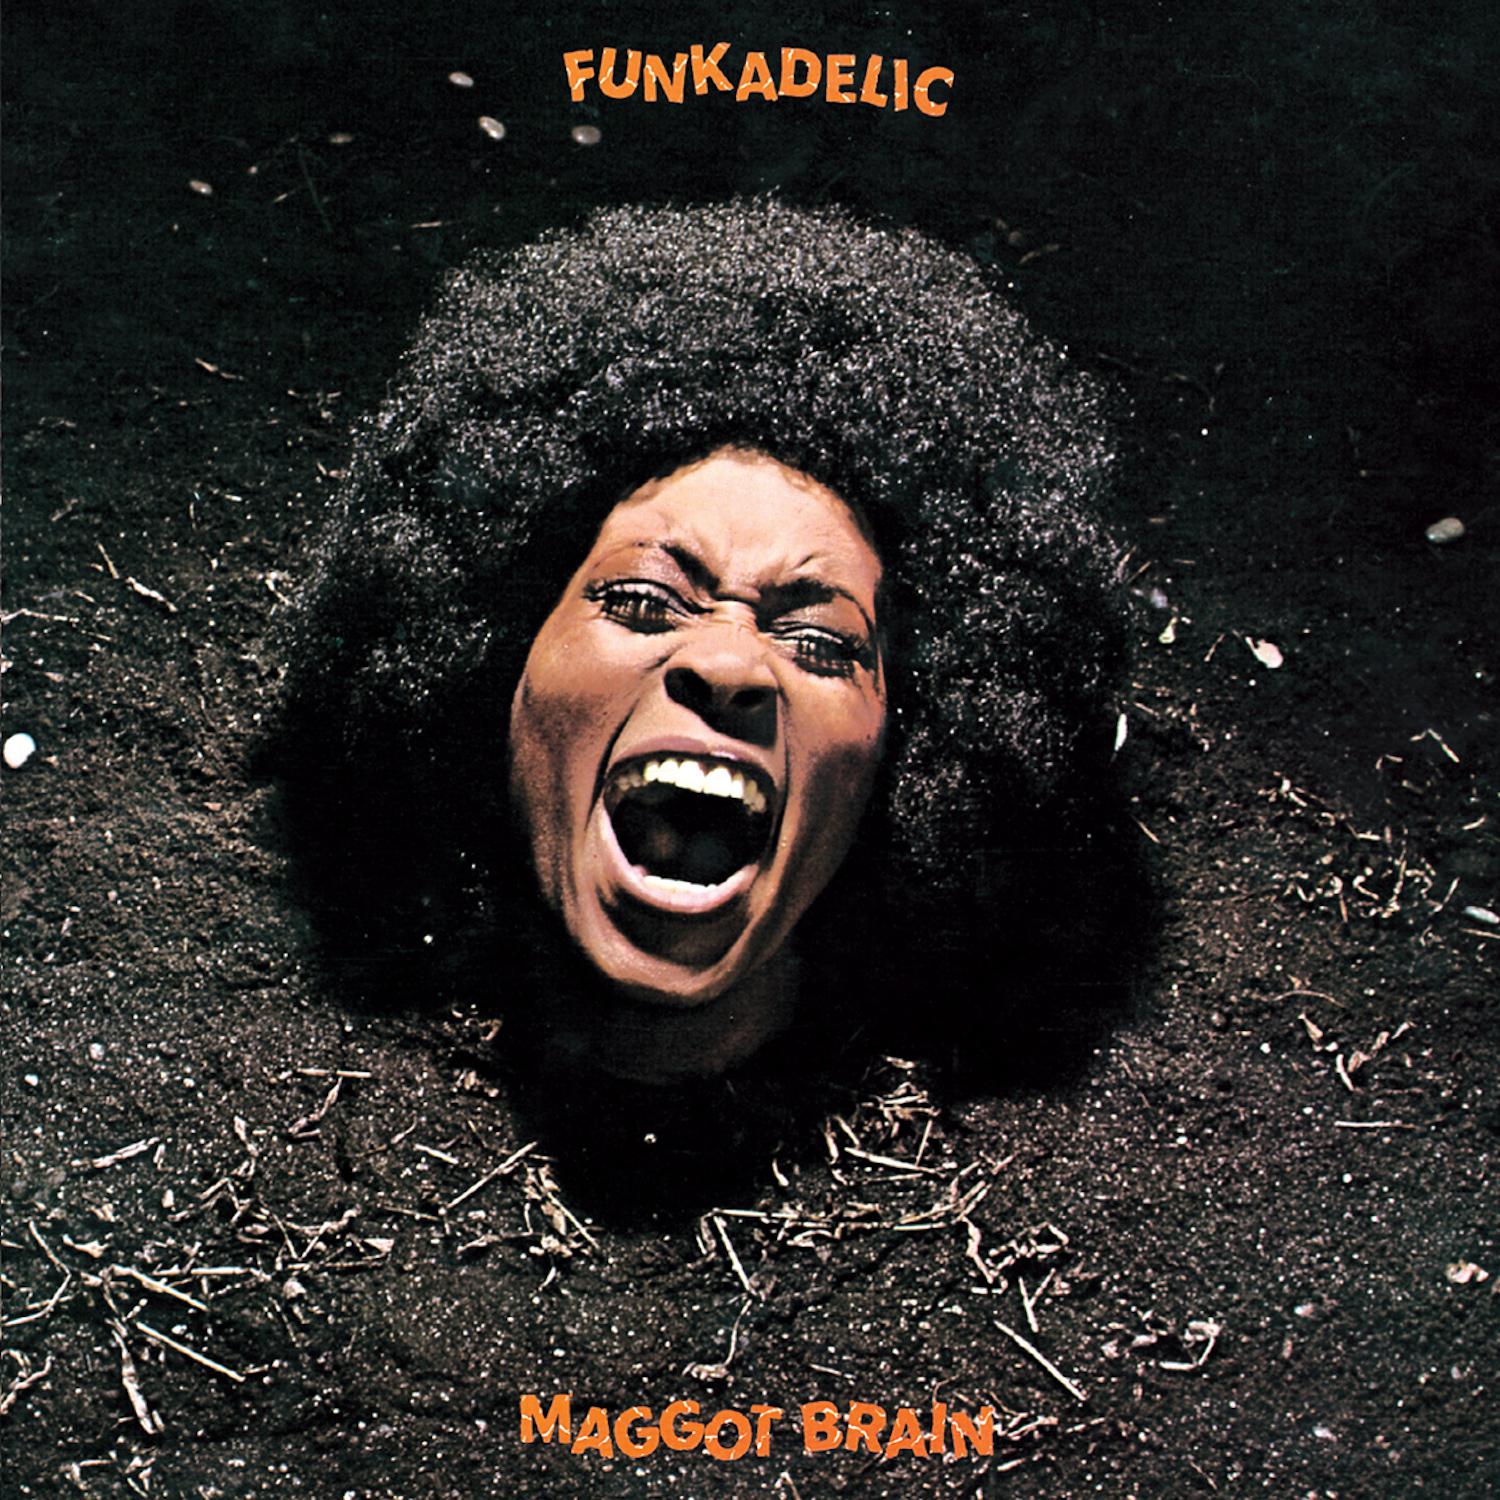 Back in Our Minds歌词 歌手Funkadelic-专辑Maggot Brain-单曲《Back in Our Minds》LRC歌词下载